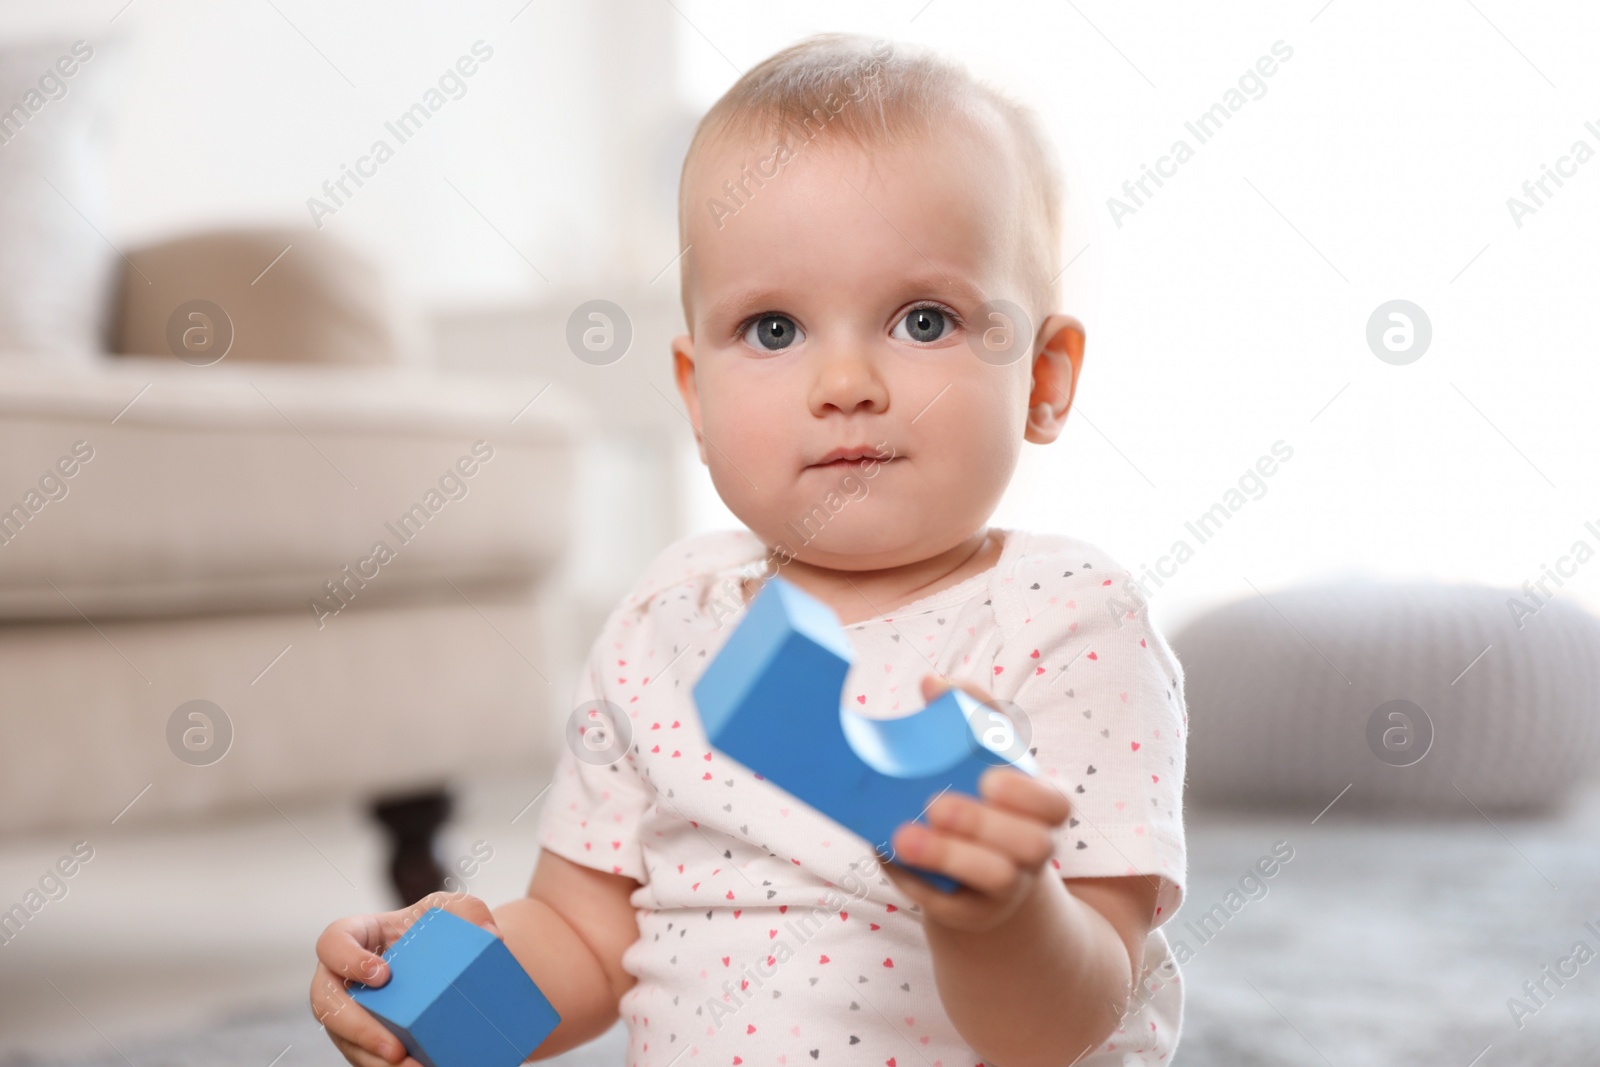 Photo of Cute baby girl playing with building blocks in room